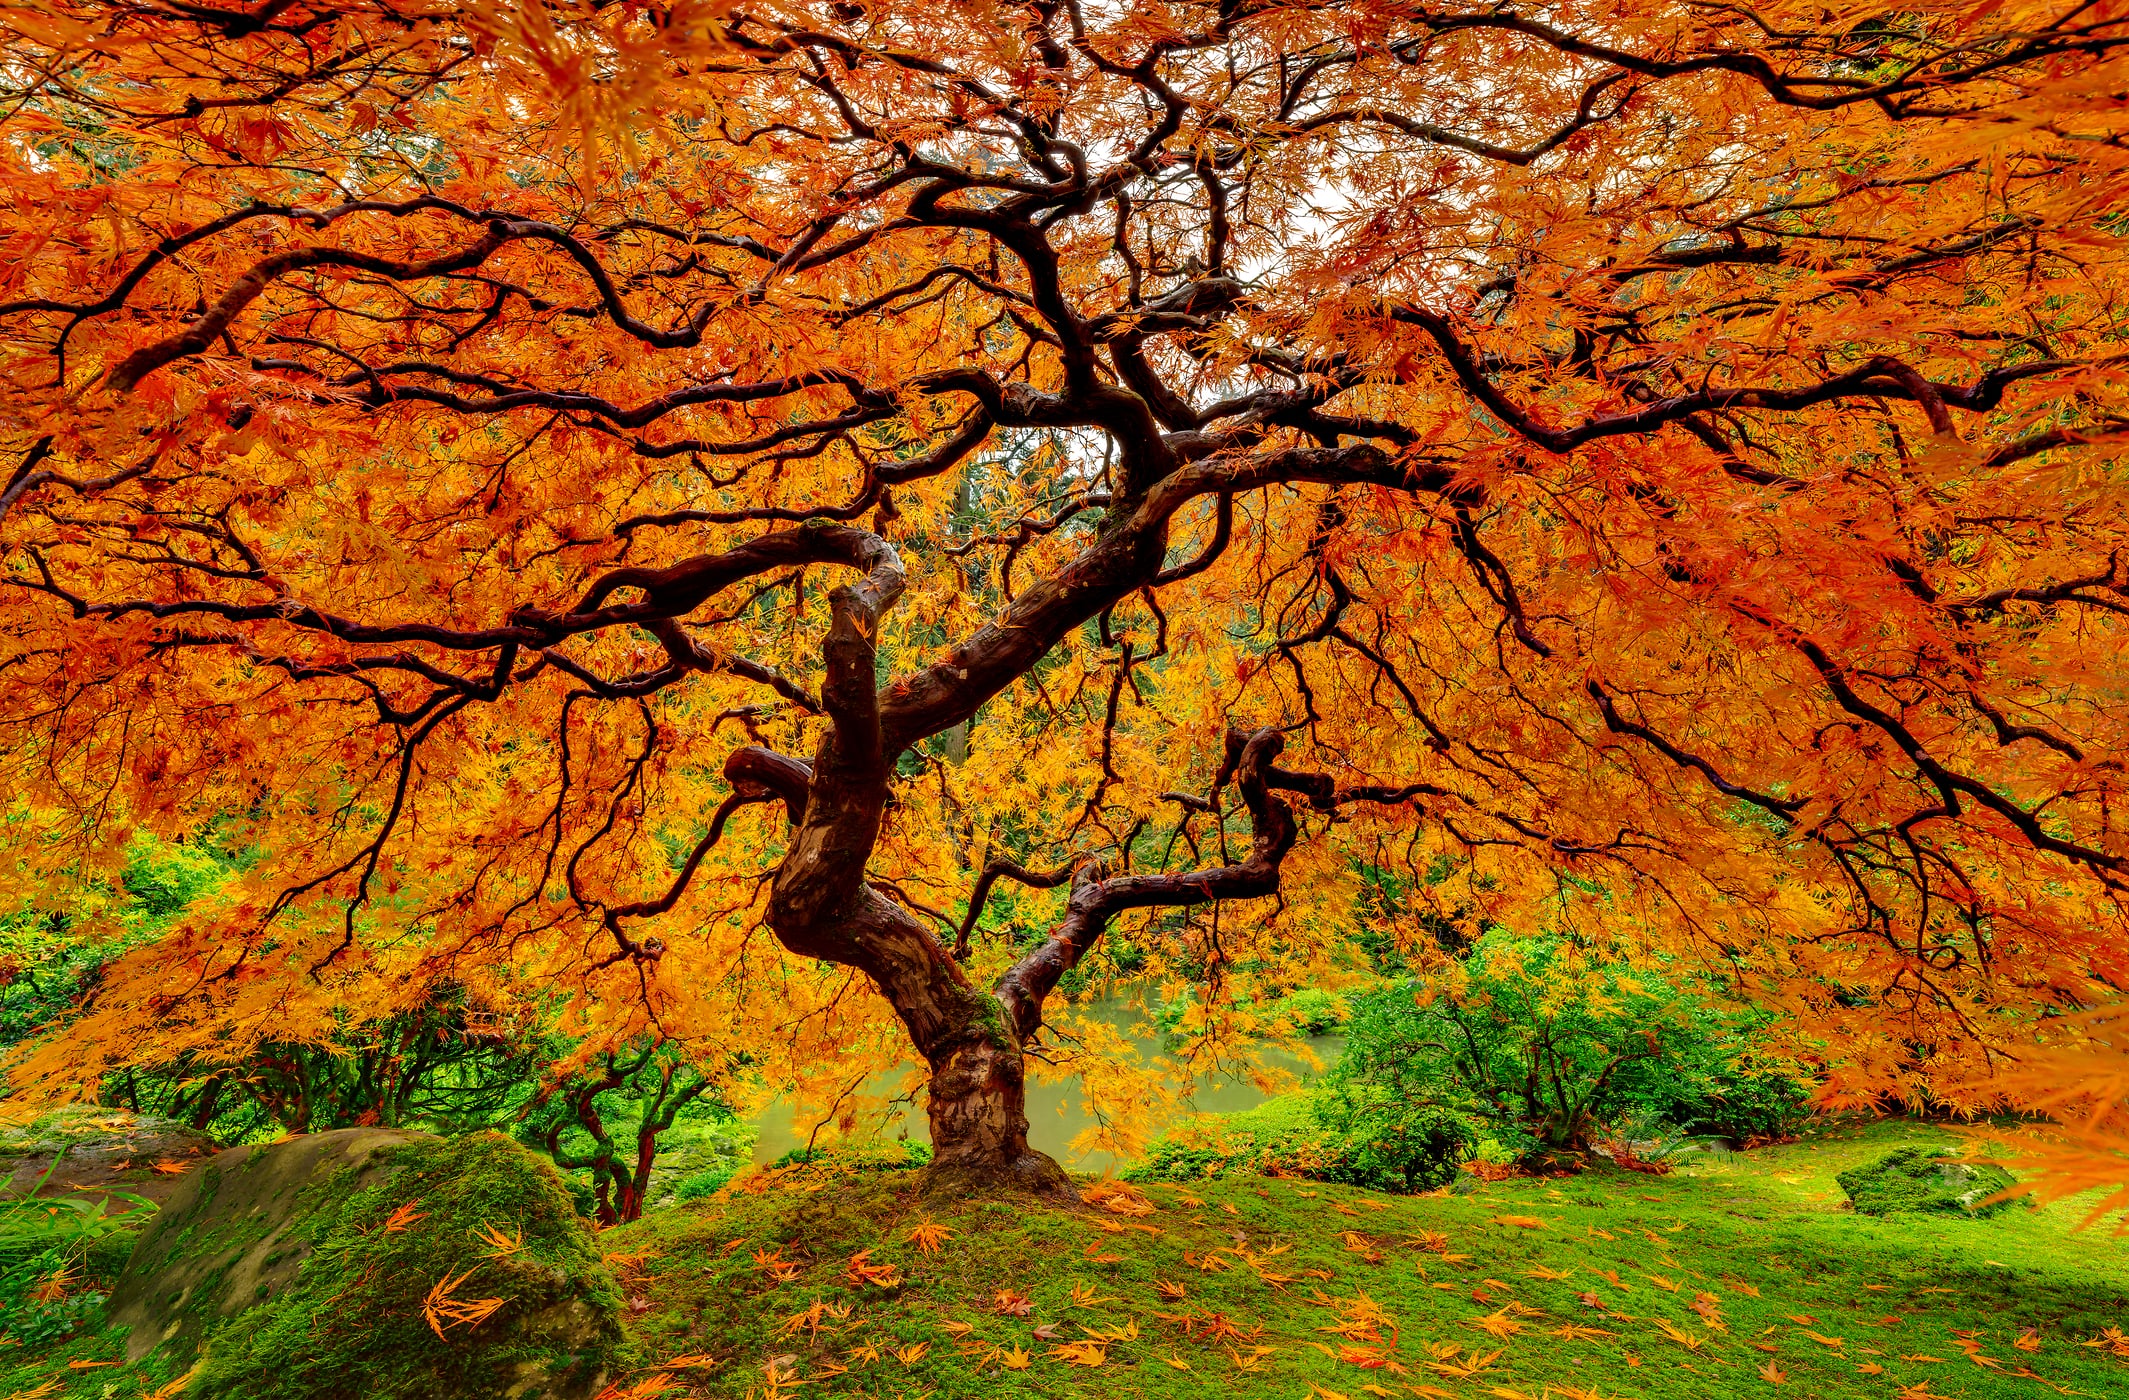 325 megapixels! A very high resolution, large-format VAST photo print of a beautiful tree with autumn foliage; nature photograph created by Chris Collacott in Portland, Oregon, USA.